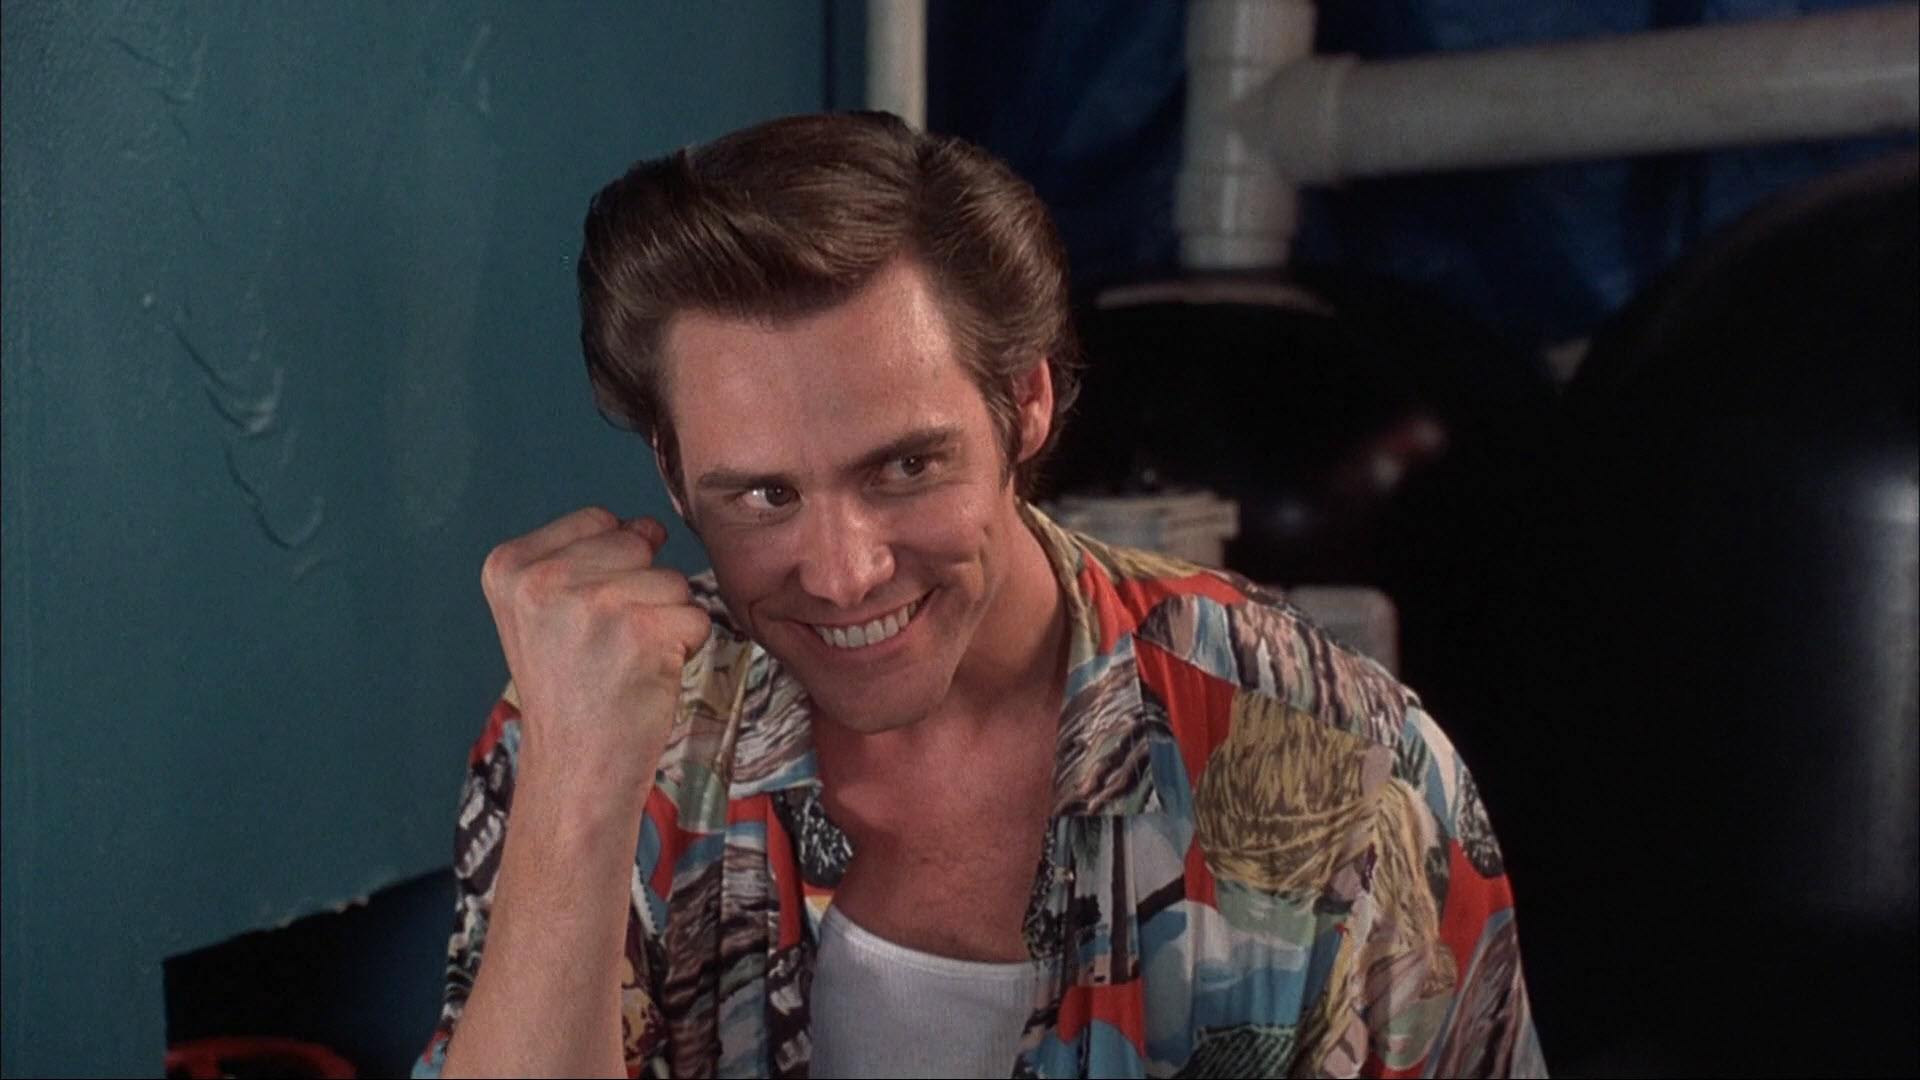 Did You Spot Ace Ventura's "The Walking Dead" Cameo? - Bloody Disgusting